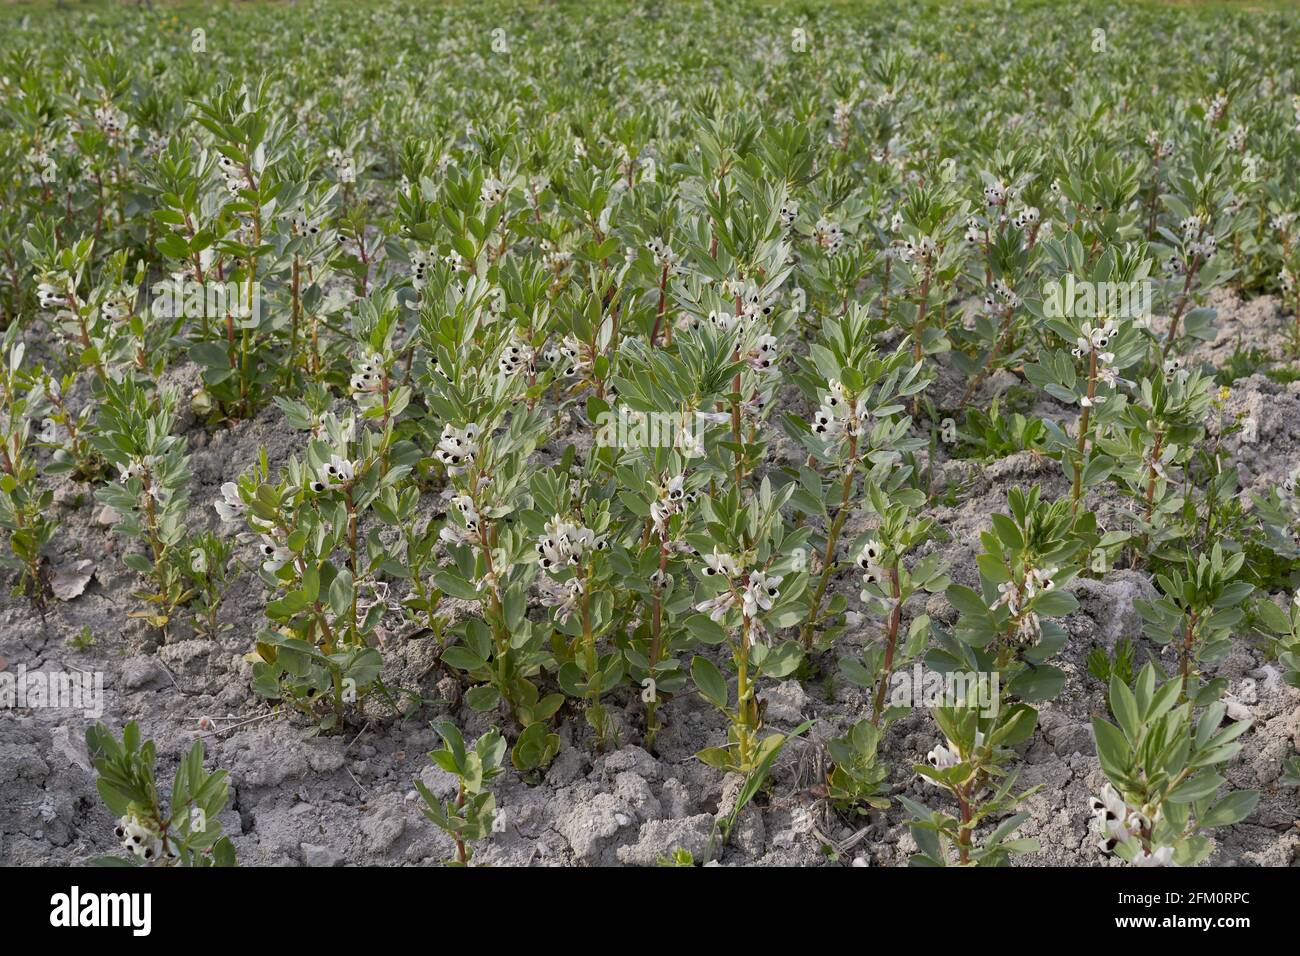 Vicia faba agricultural filed Stock Photo